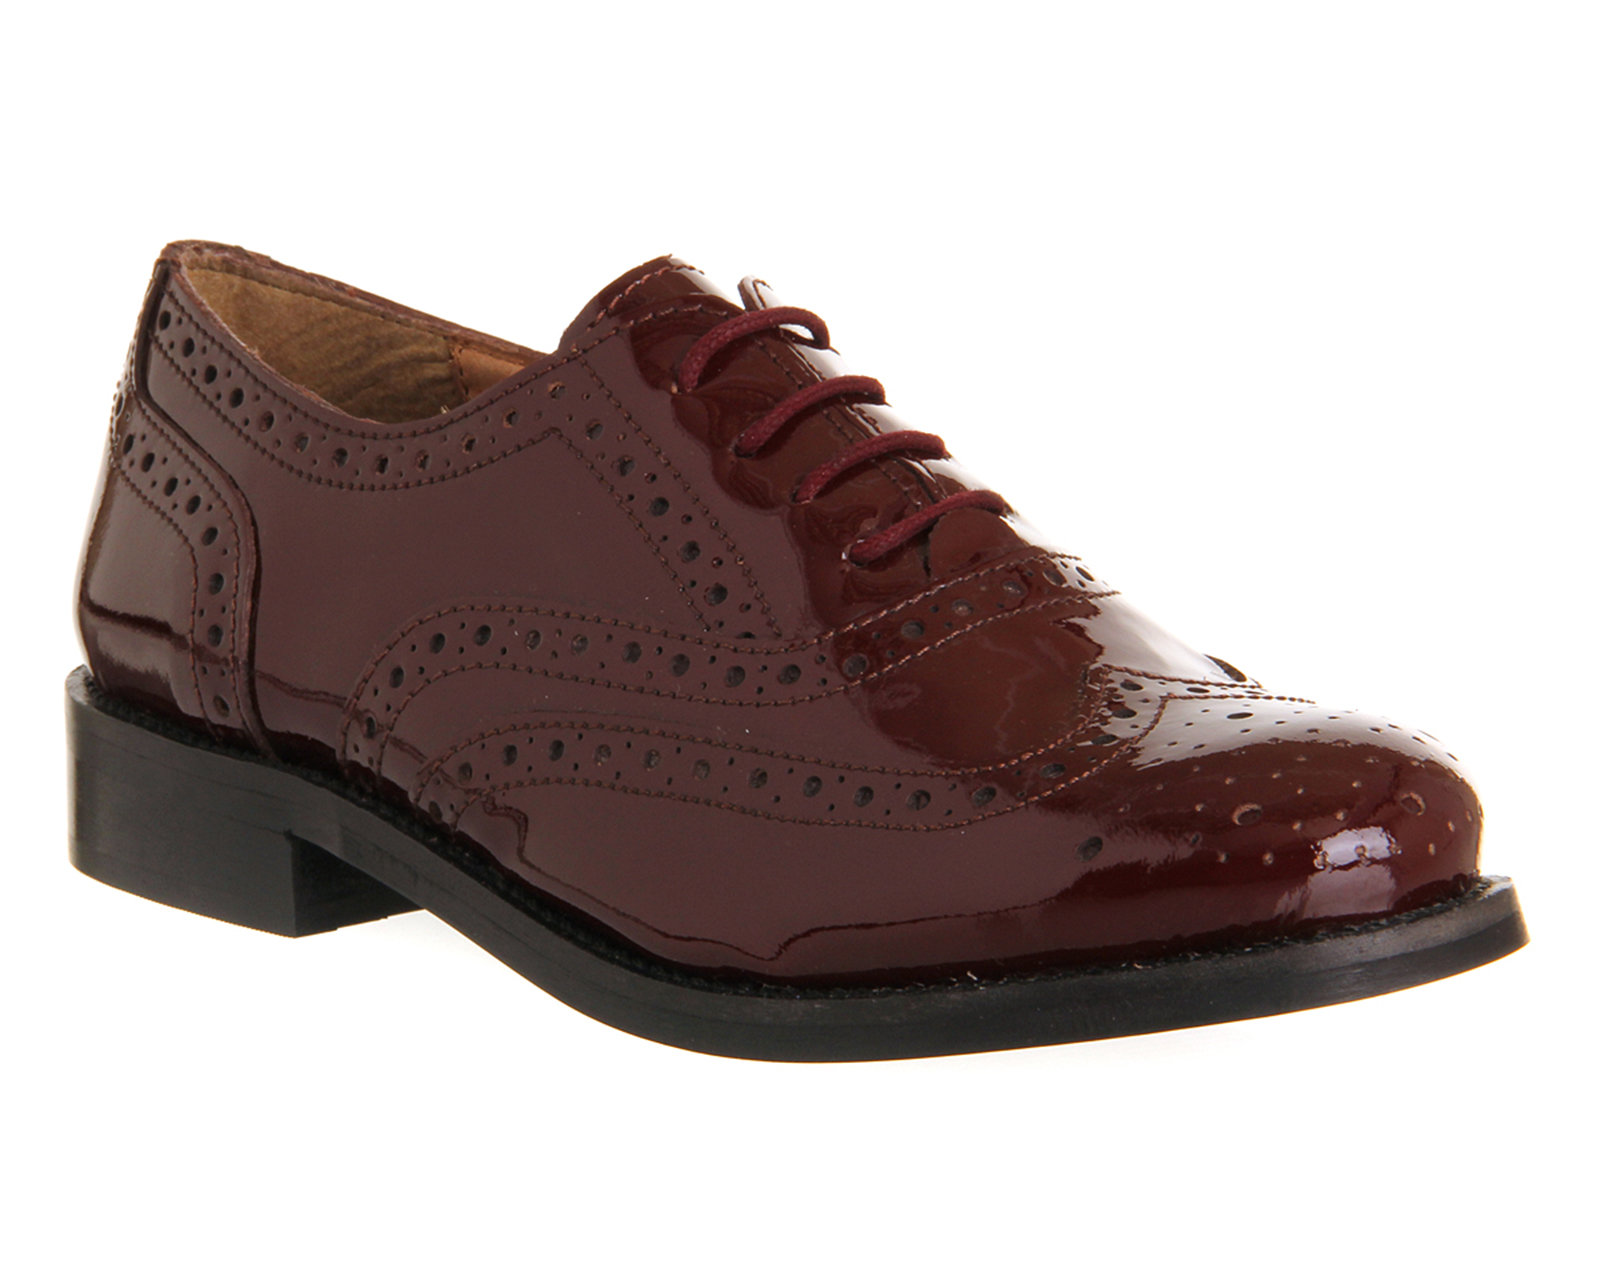 patent leather brogues ladies